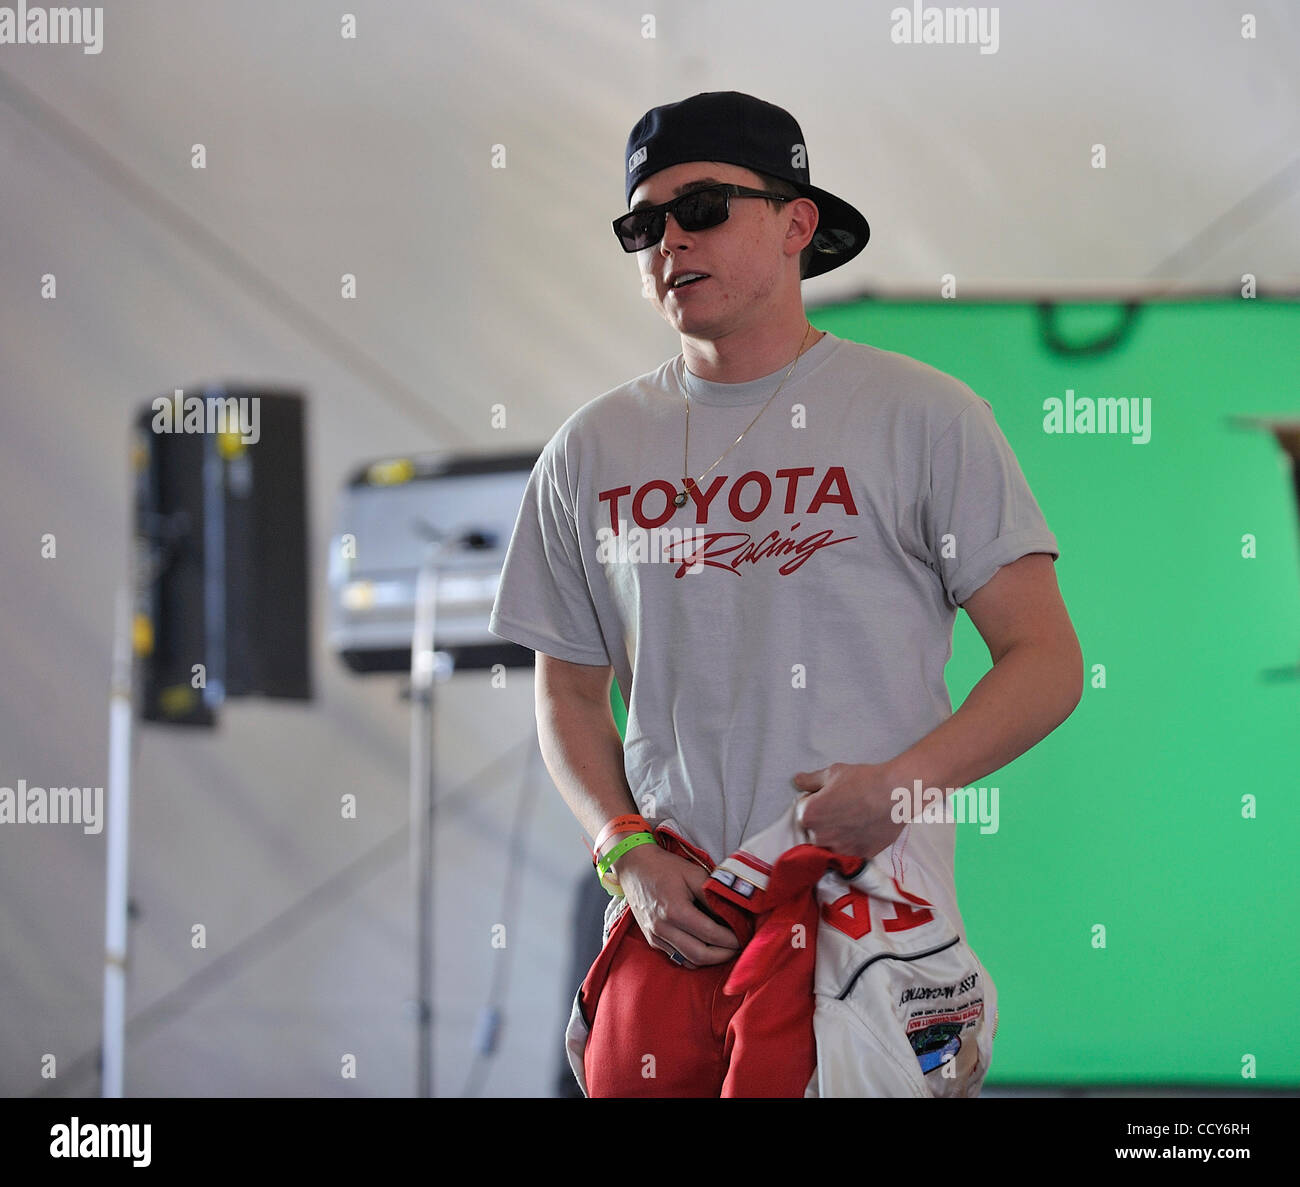 LONG BEACH, CALIF. -- Jesse McCartney during the media day for the Toyota Grand Prix of Long Beach (Calif.) on April 6, 2010. McCartney is racing in the Toyota Pro/Celebrity race on Saturday, April 17.  Photo by Jeff Gritchen / Long Beach Press-Telegram Stock Photo